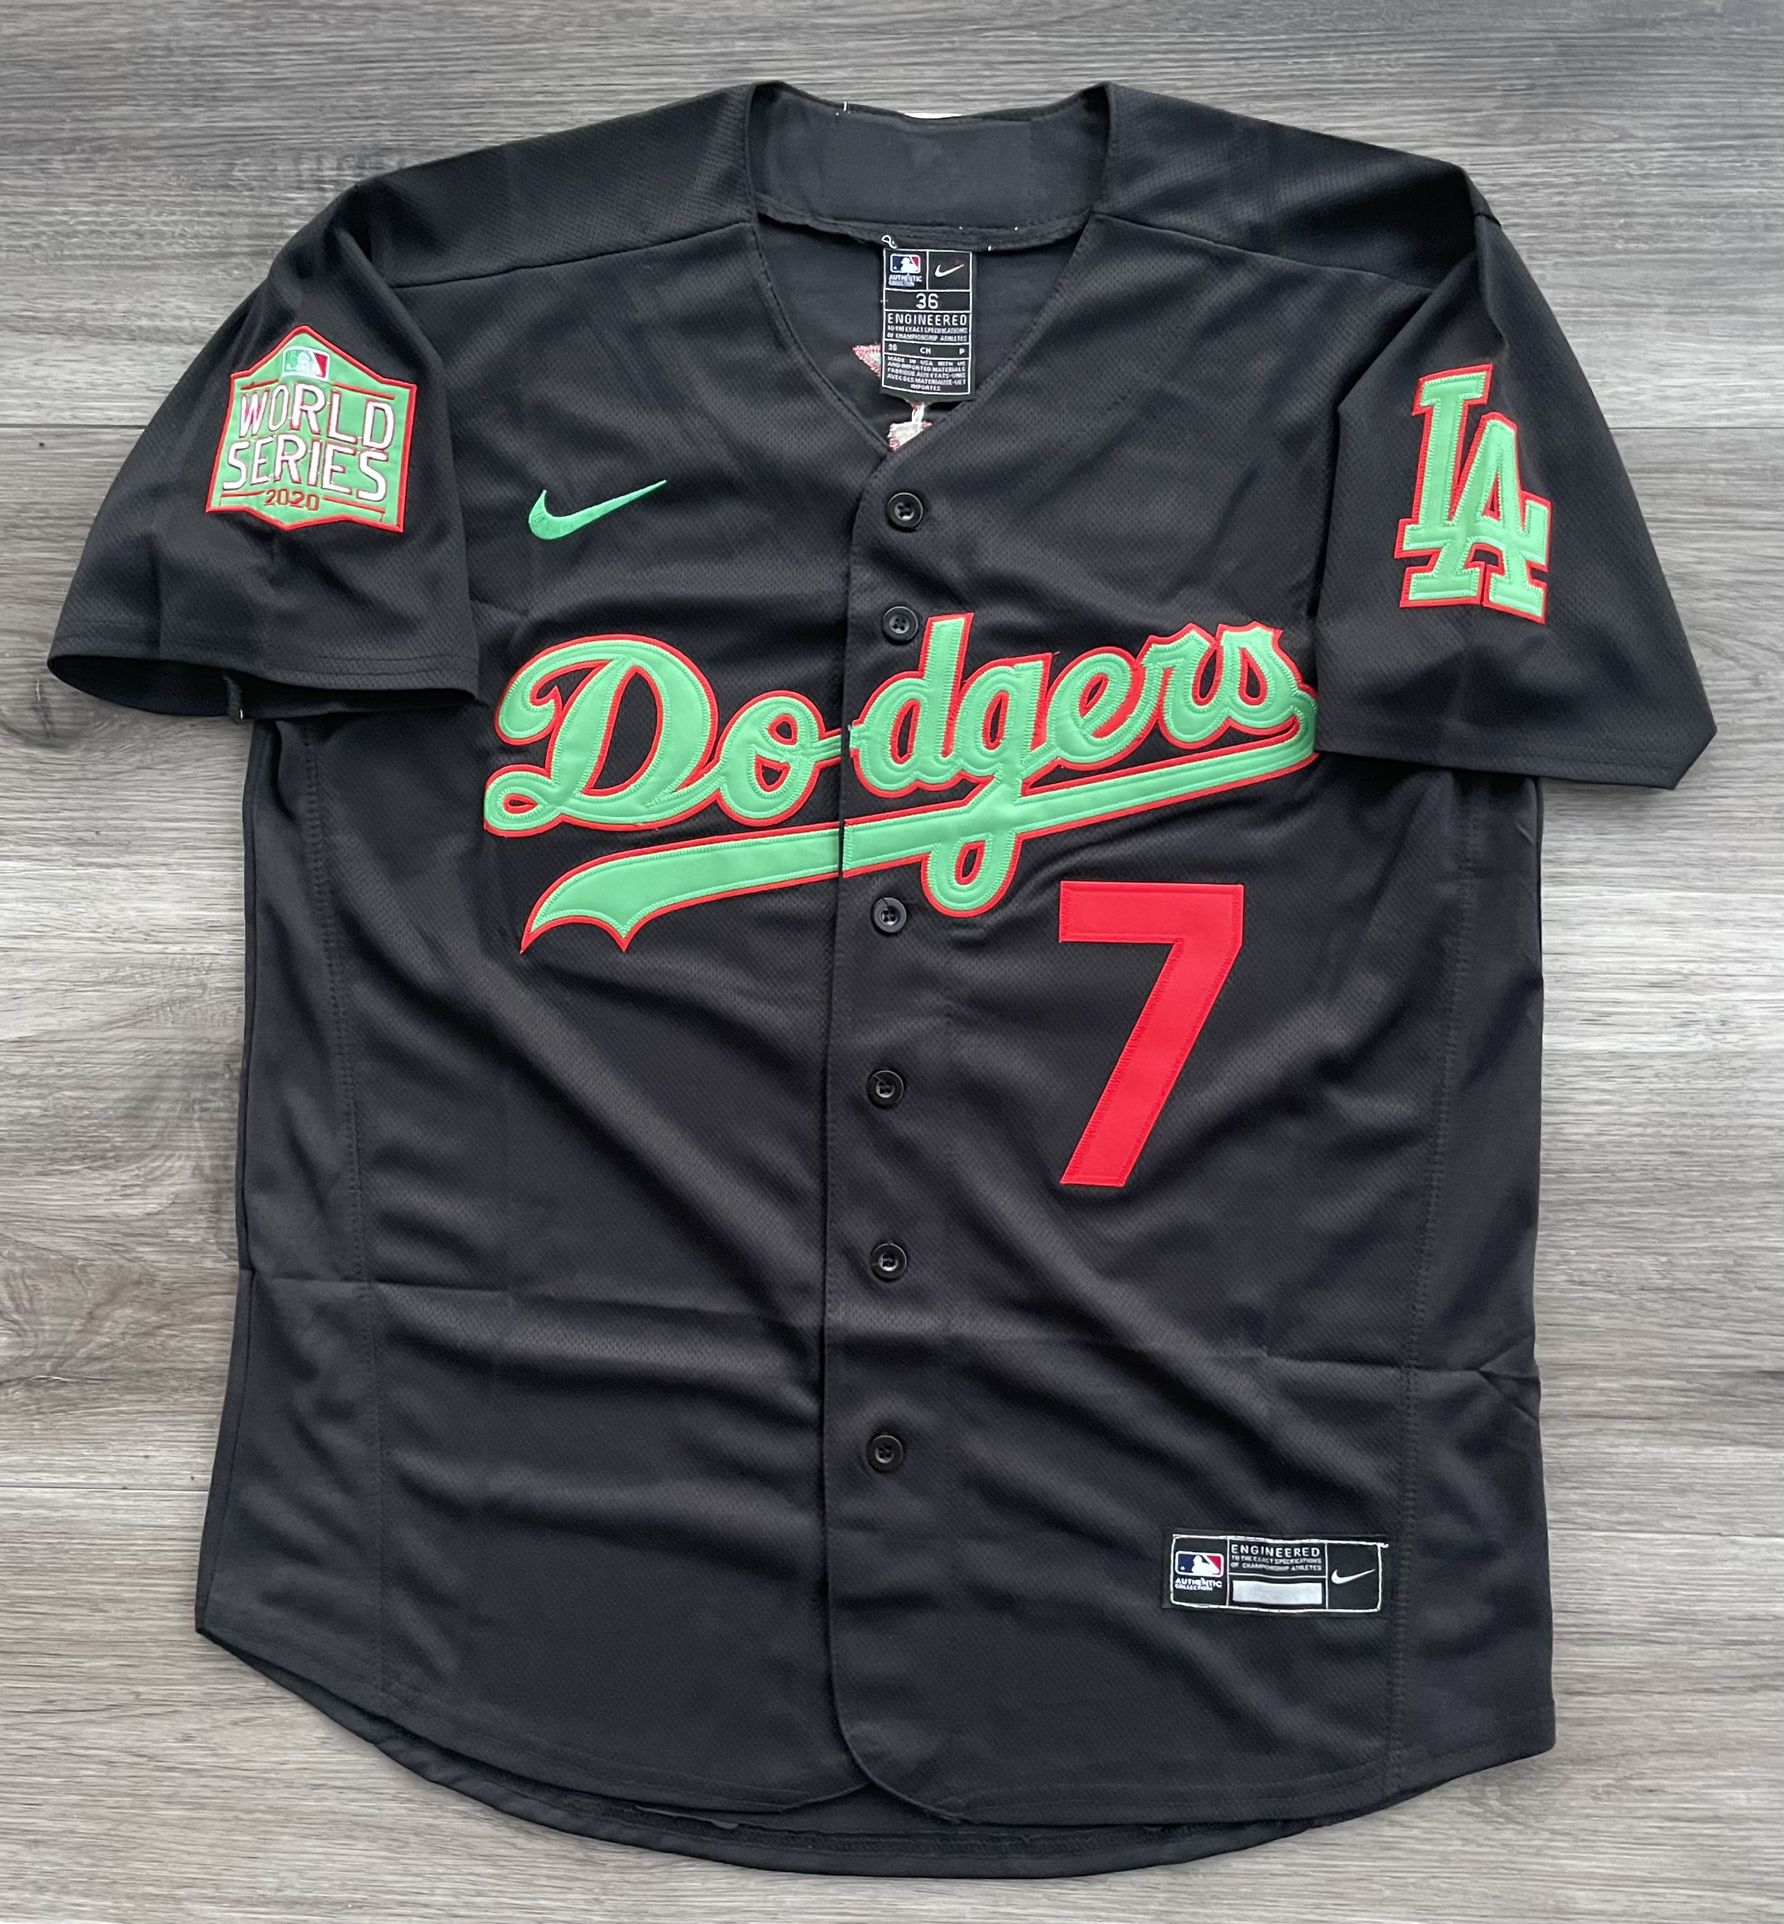 Dodgers Mexico Urias Jersey for Sale in Rancho Cucamonga, CA - OfferUp